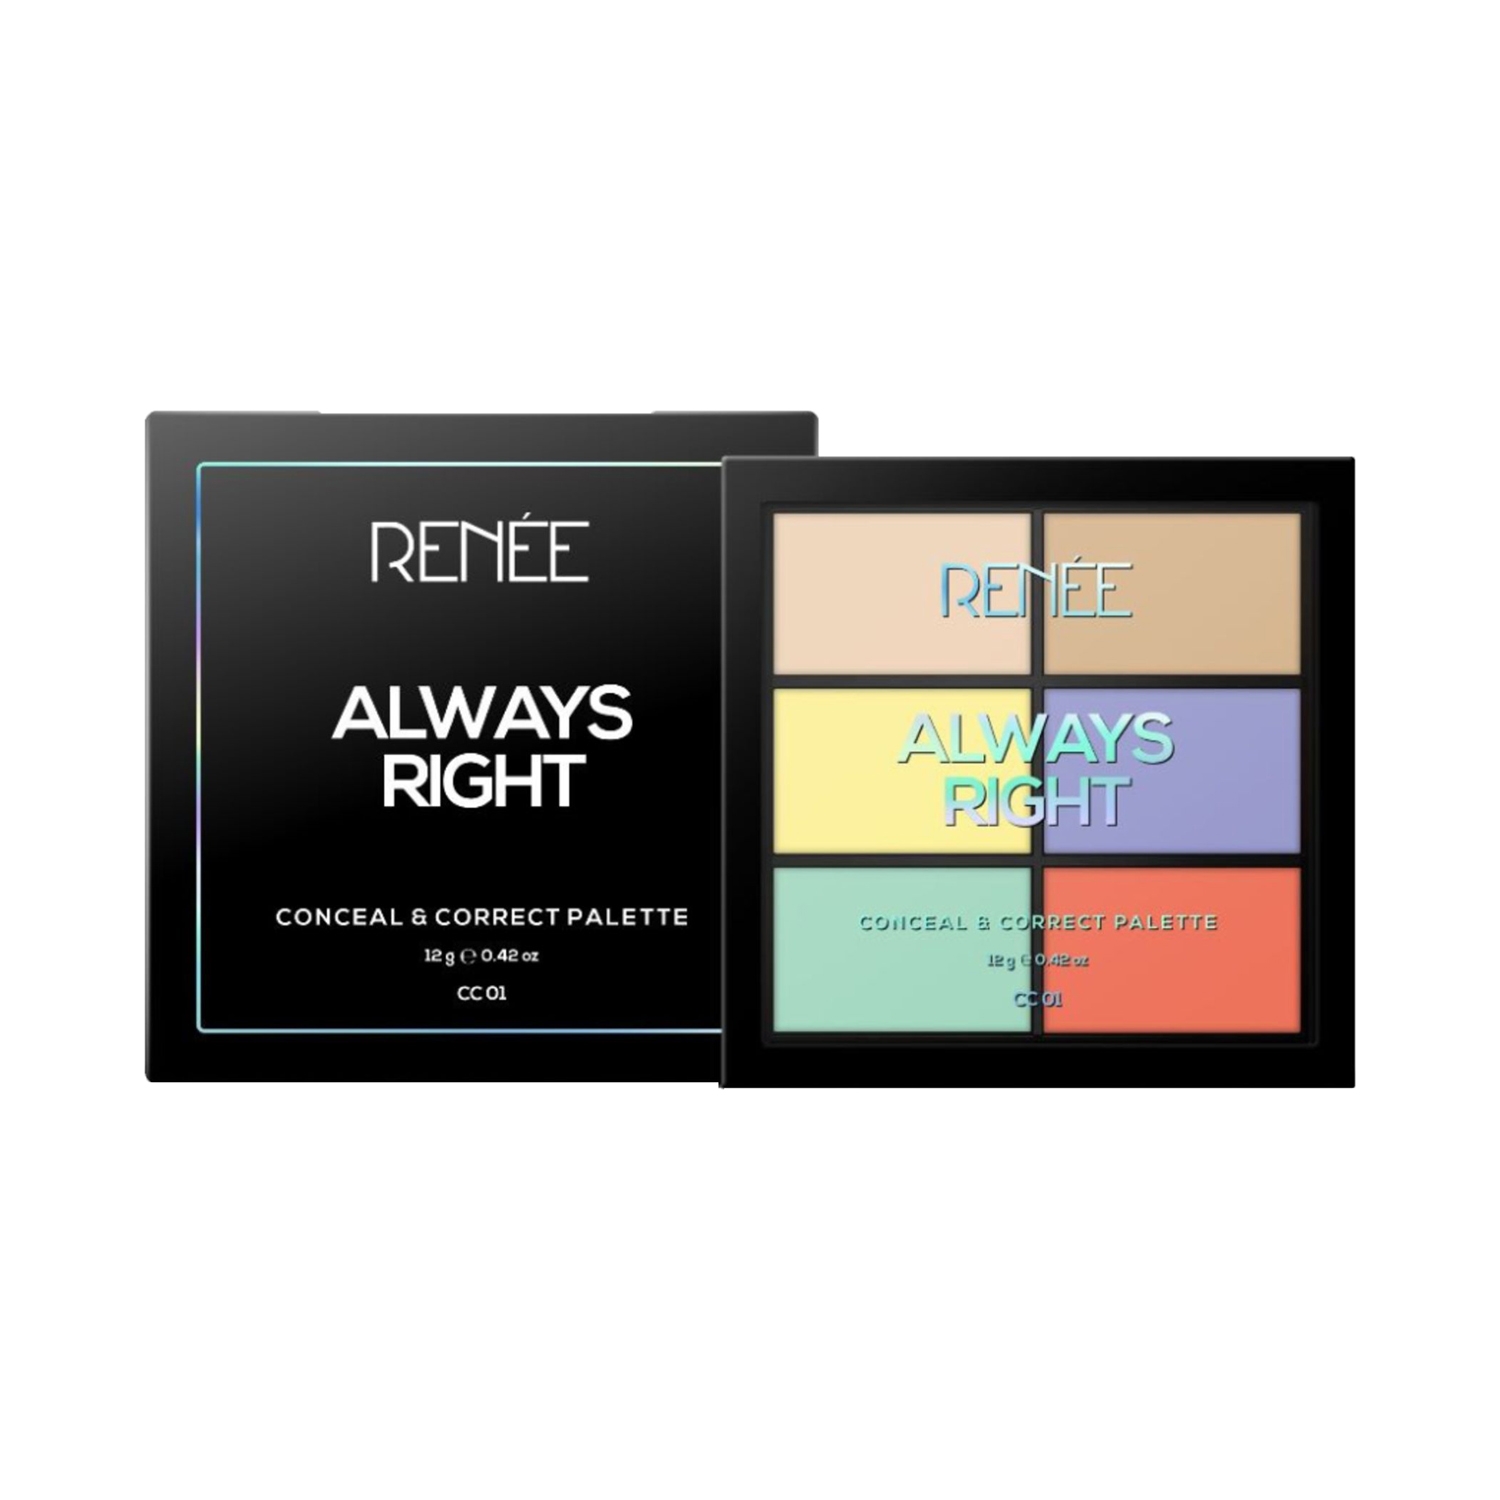 RENEE | RENEE Always Right Conceal & Correct Palette - CC01 (12g)